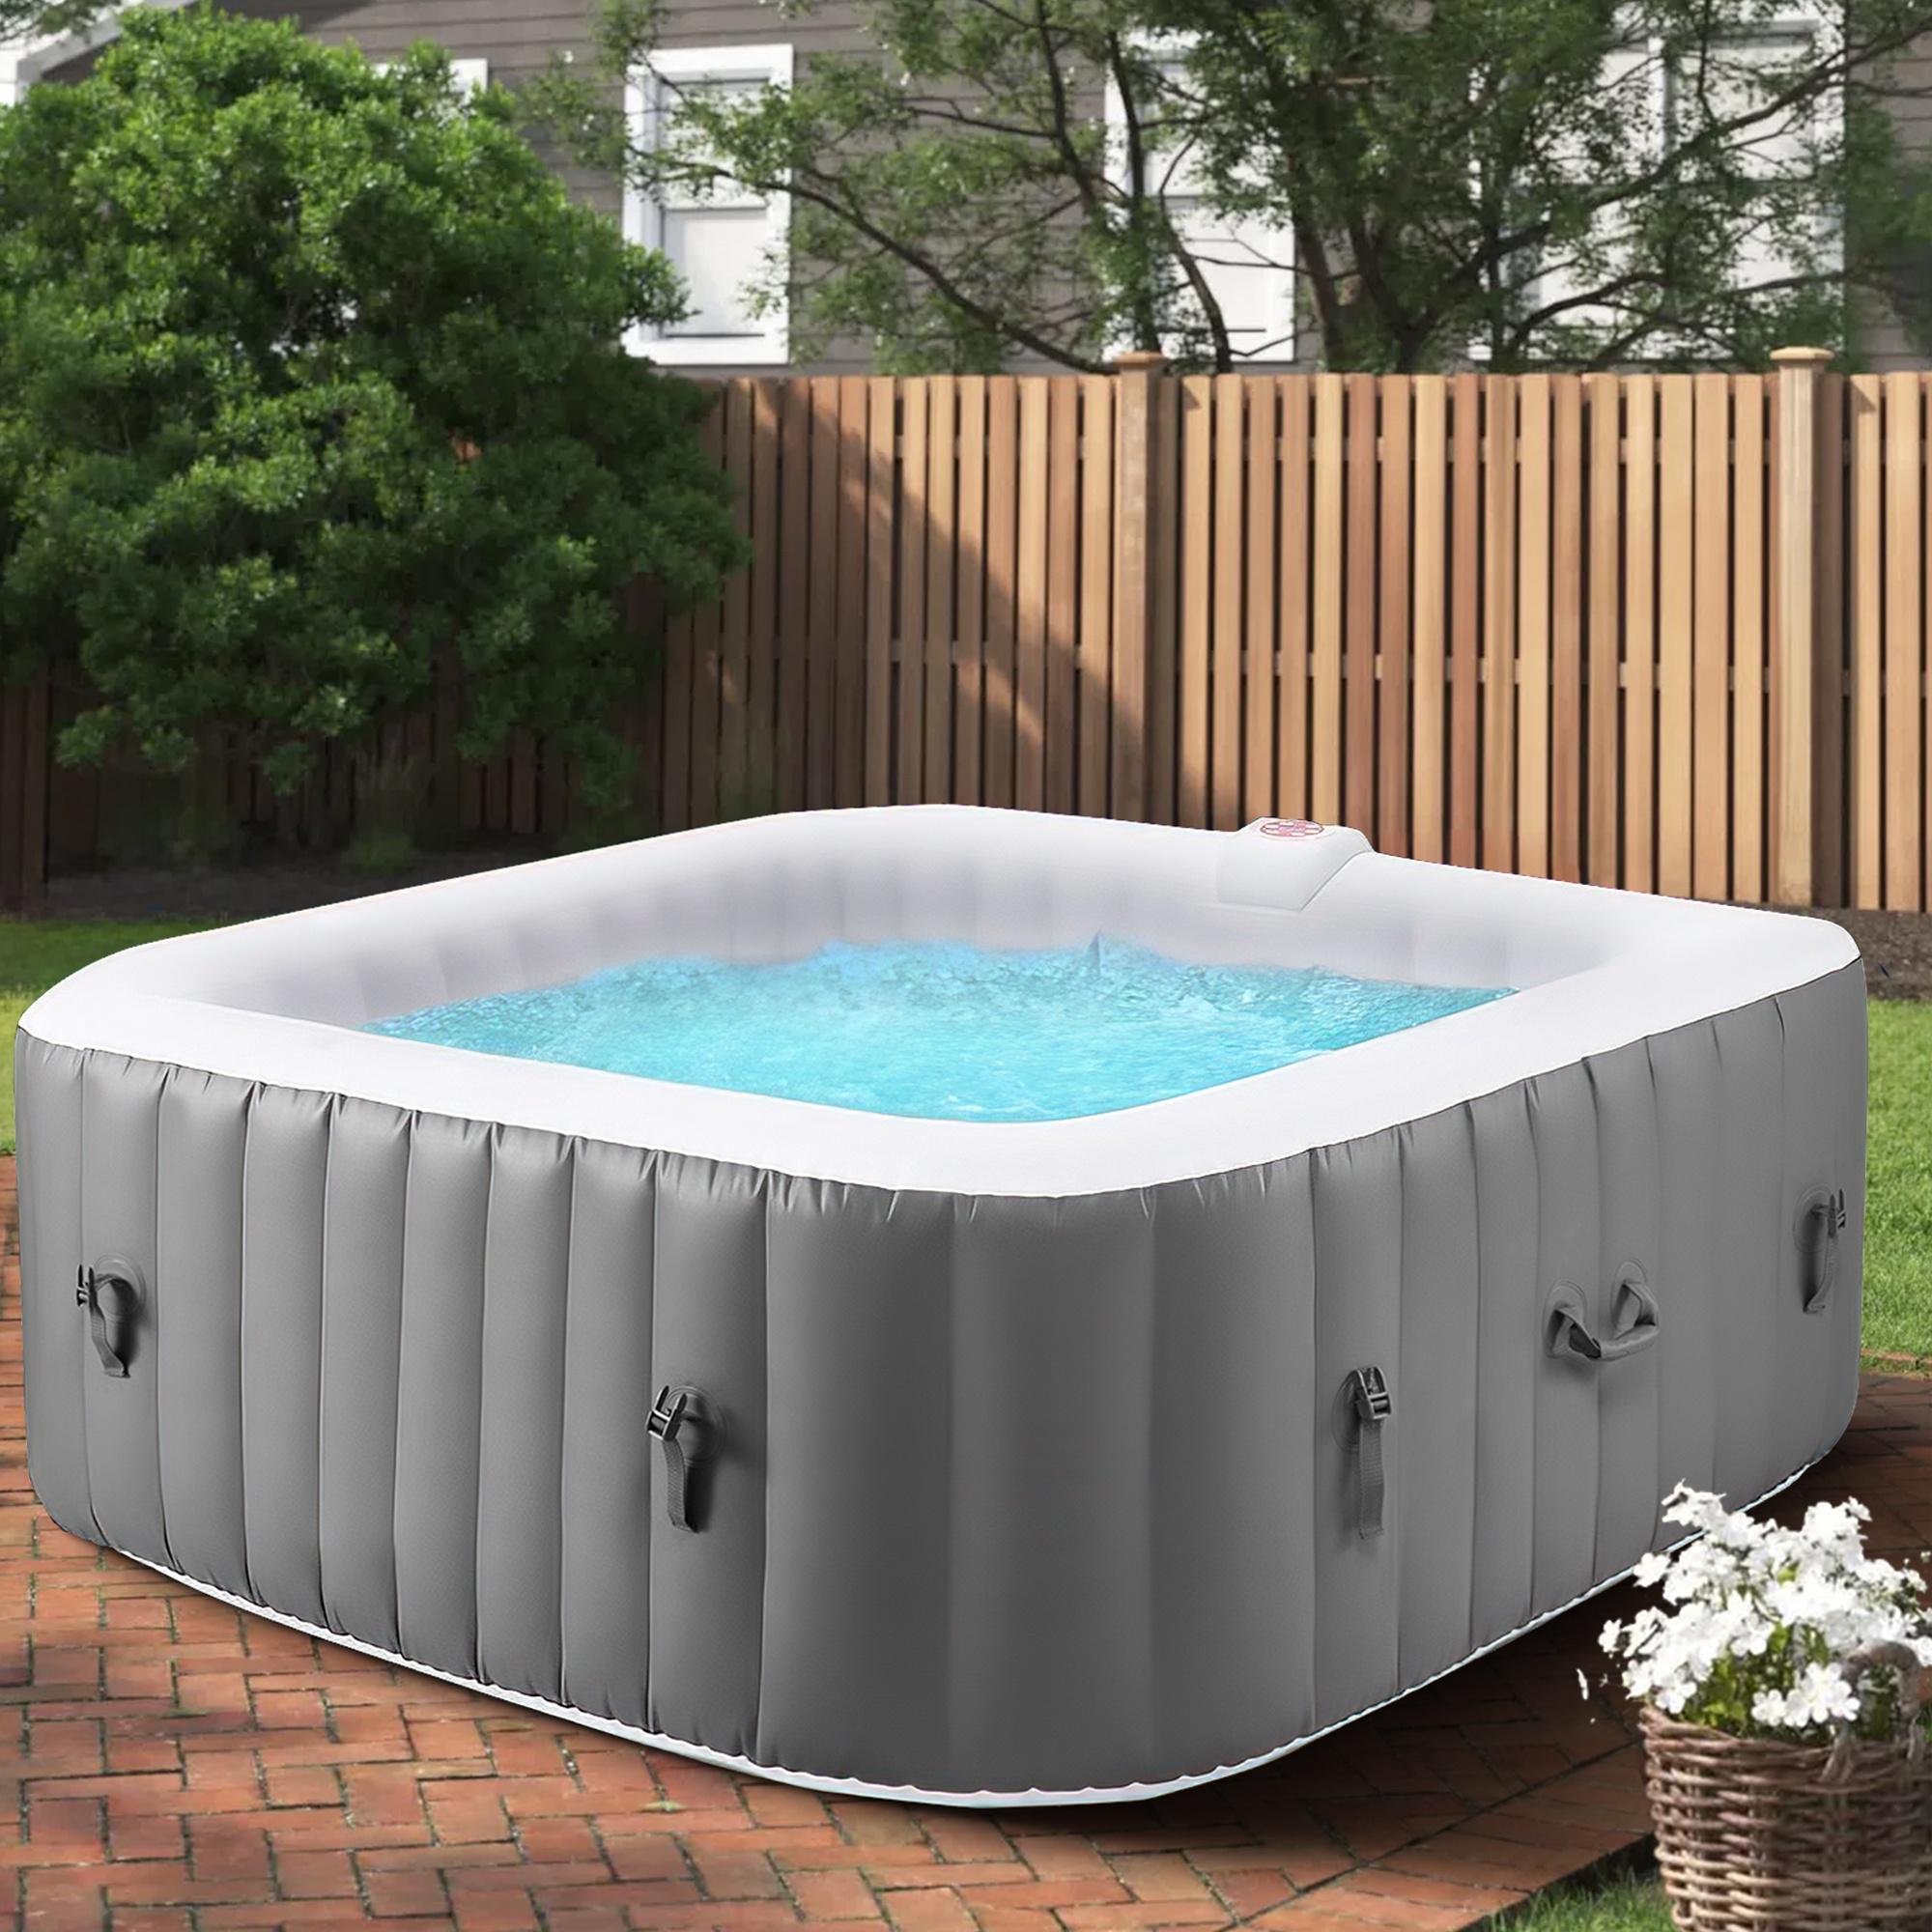 Hot Tub, Seizeen 4-6 Person Inflatable Hot Tub Home SPA for Outdoor, 910L Large Capacity, 130pcs Massage Jets, with 2 Filters, Lockable Cover, Storage Bag, Max 104℉, 73in, Gray - image 1 of 8